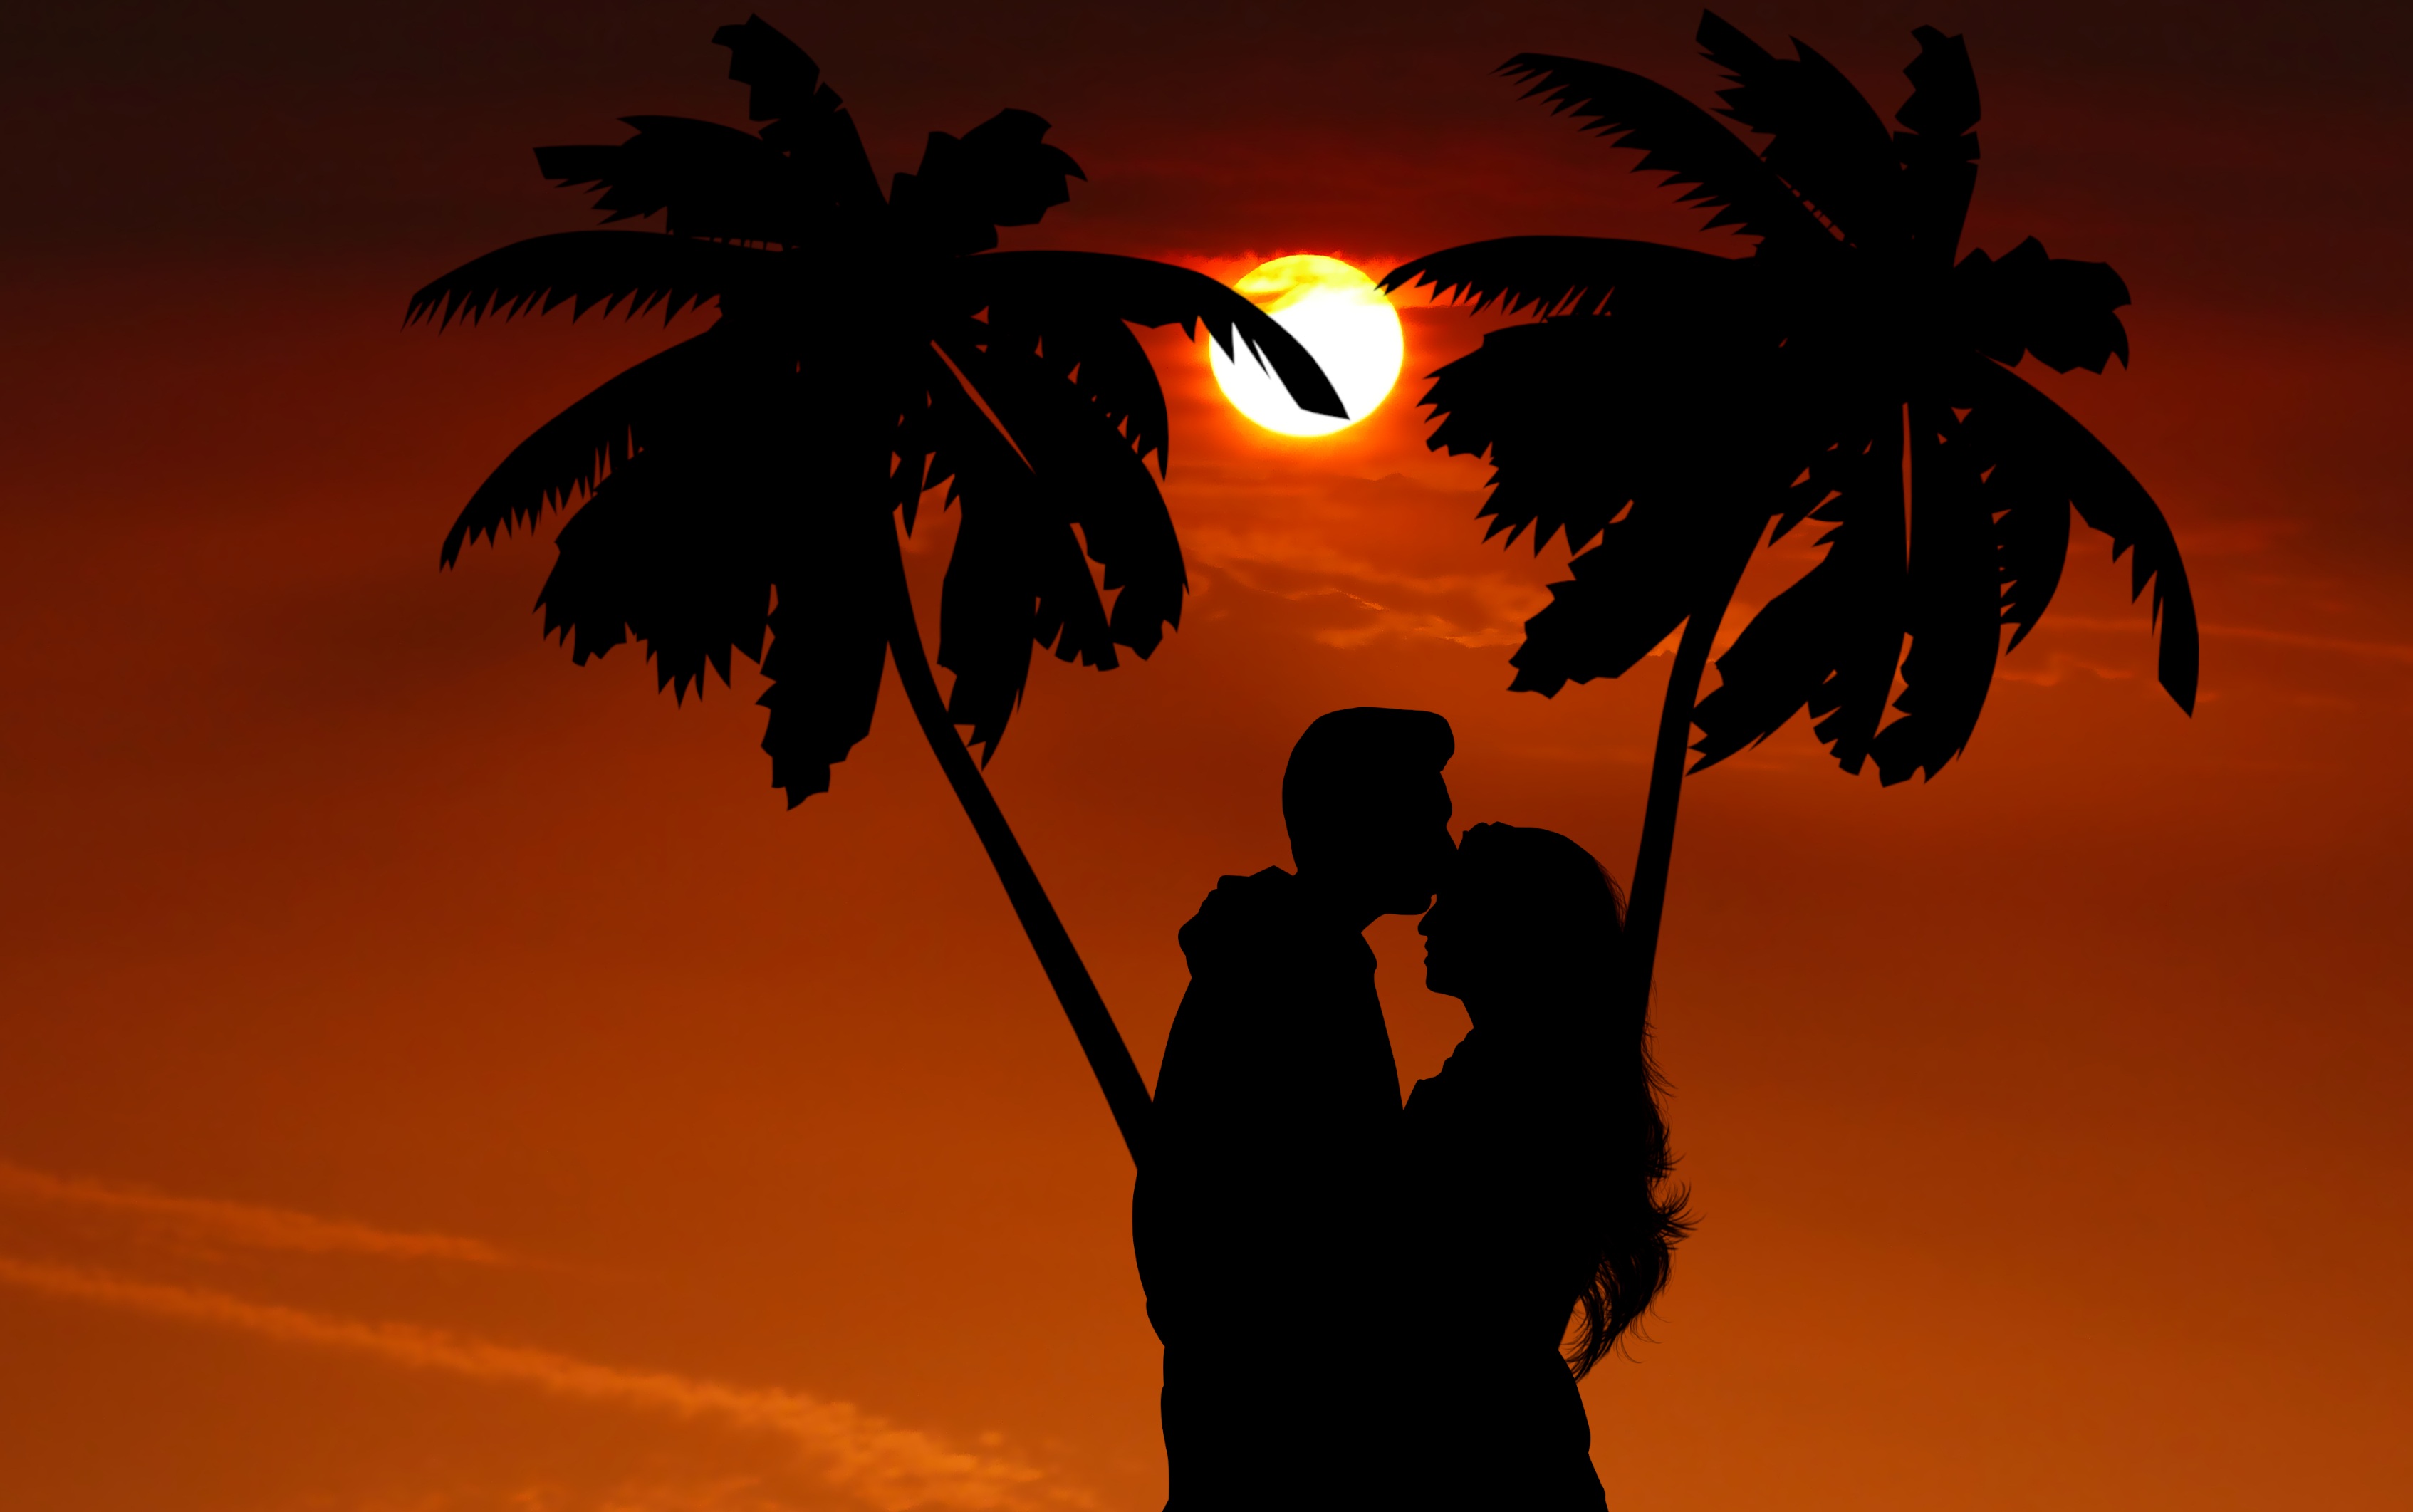 android couple, love, romance, pair, embrace, night, silhouettes, palms